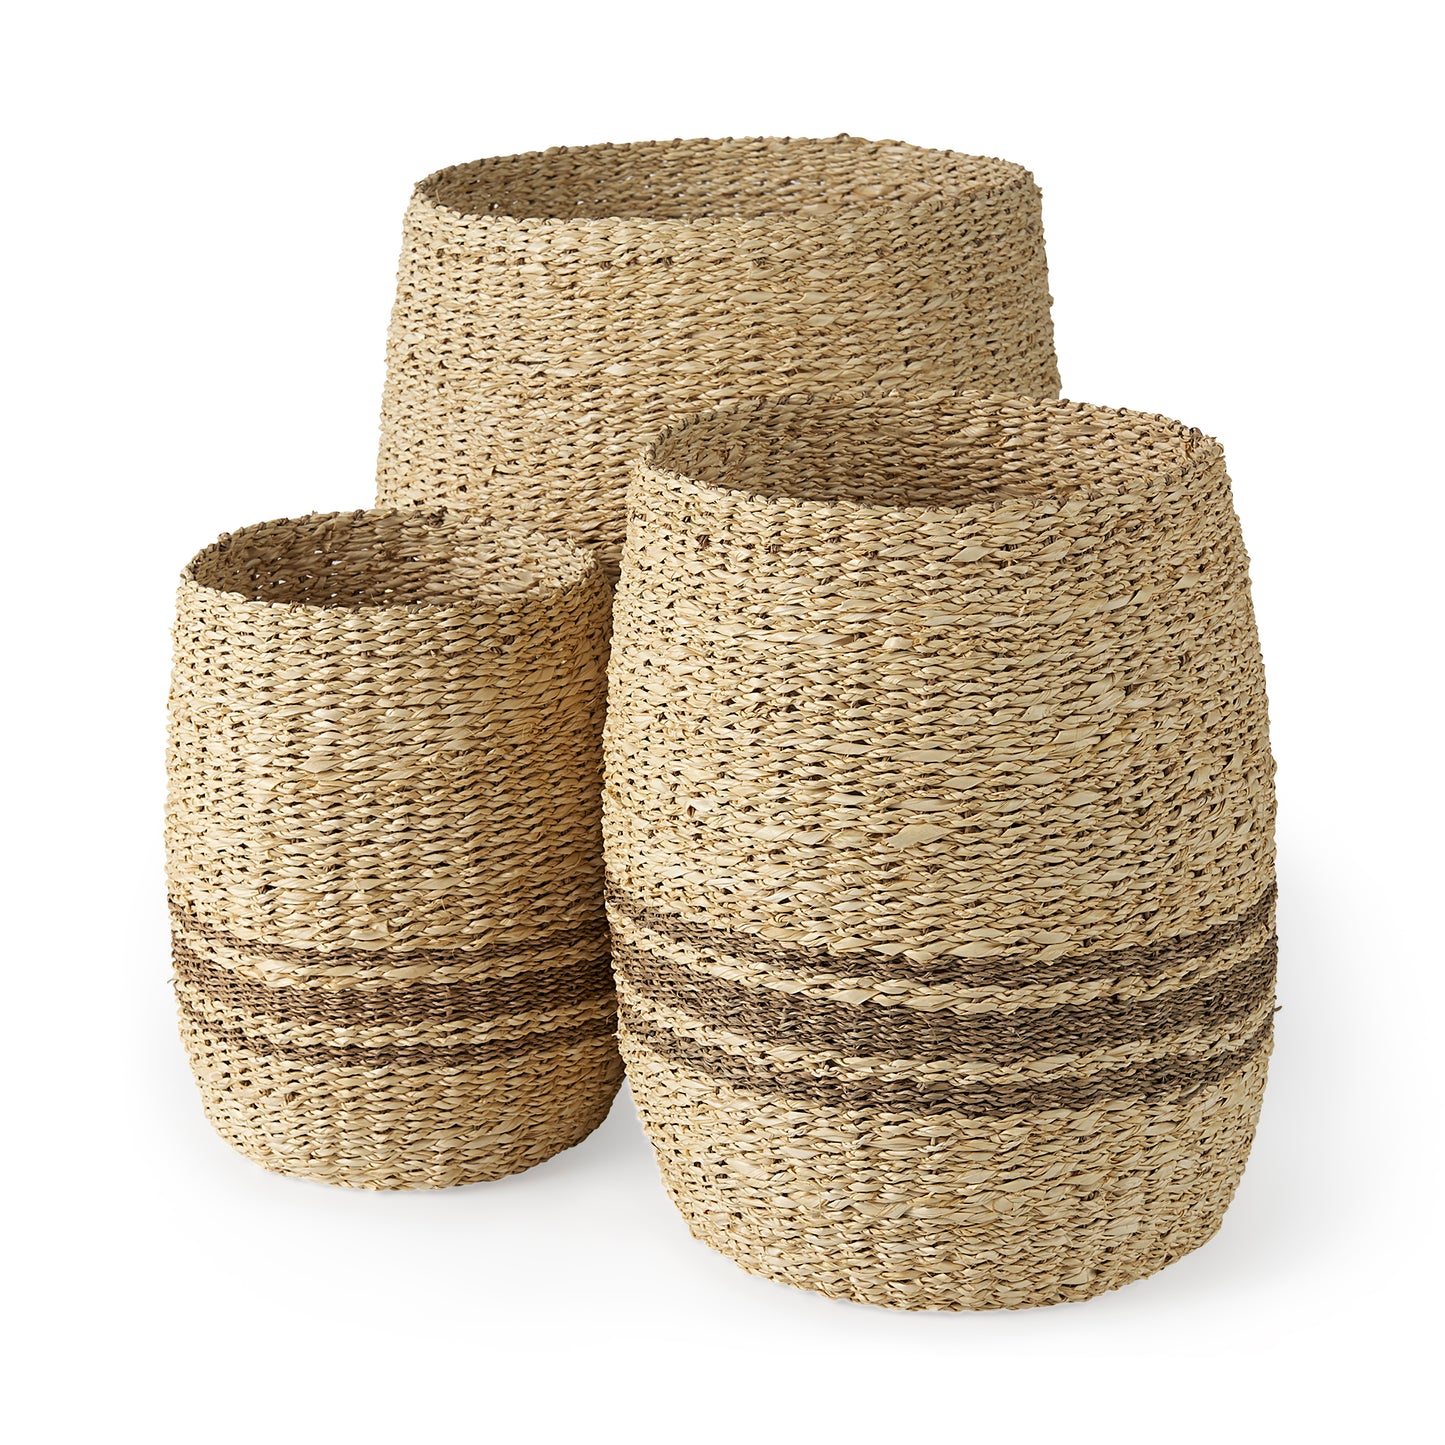 Sivannah Light Brown and Medium Brown Striped Seagrass Round Basket - Large